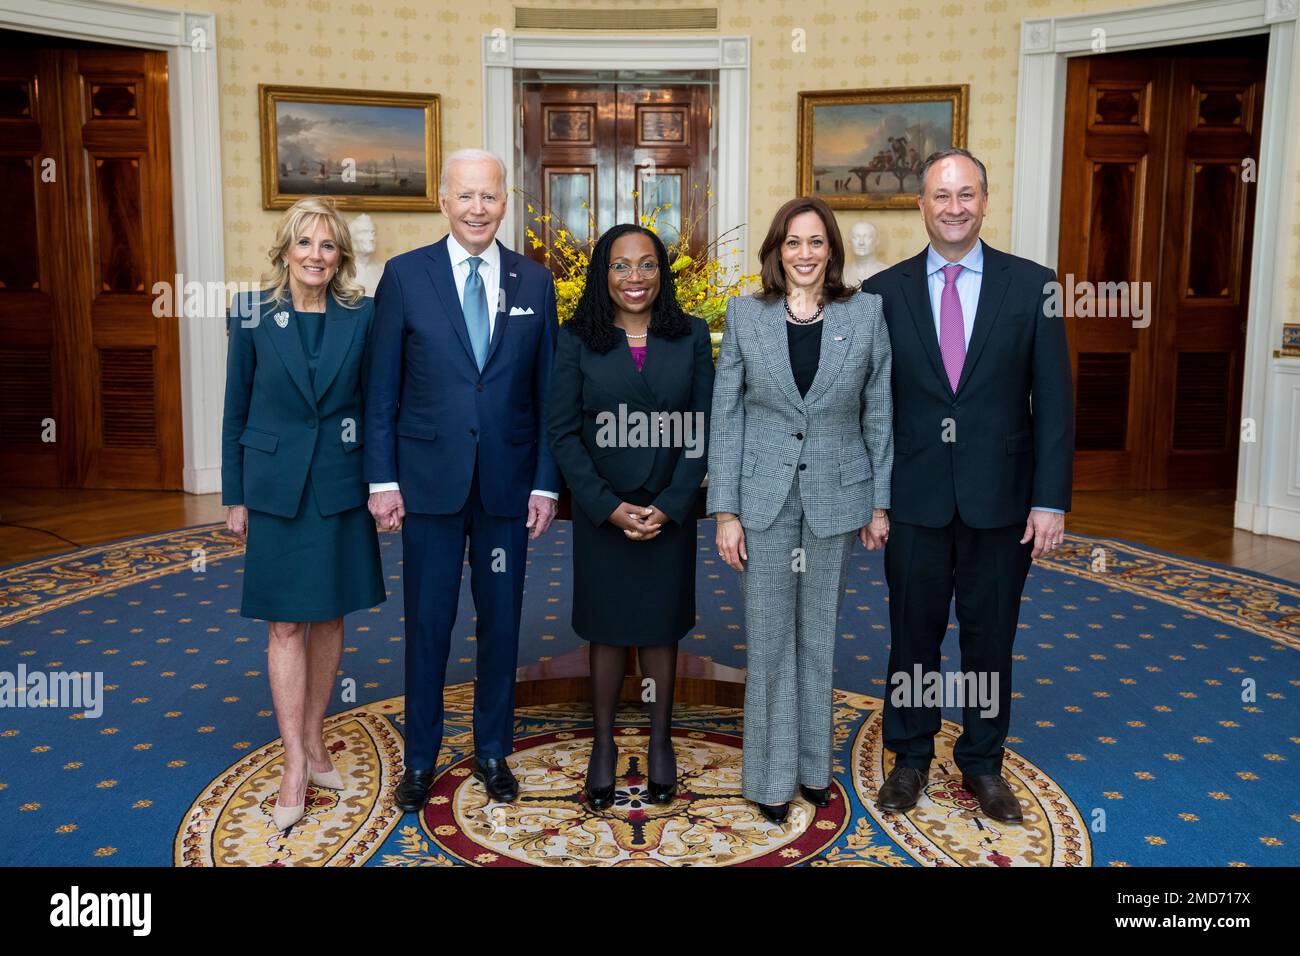 Reportage: President Joe Biden, First Lady Jill Biden, Vice President Kamala Harris and Second Gentleman Doug Emhoff pose for a photo with Judge Ketanji Brown Jackson in the Blue Room of the White House, Friday, February 25, 2022, after the announcement of her nomination to the U.S. Supreme Court. Stock Photo